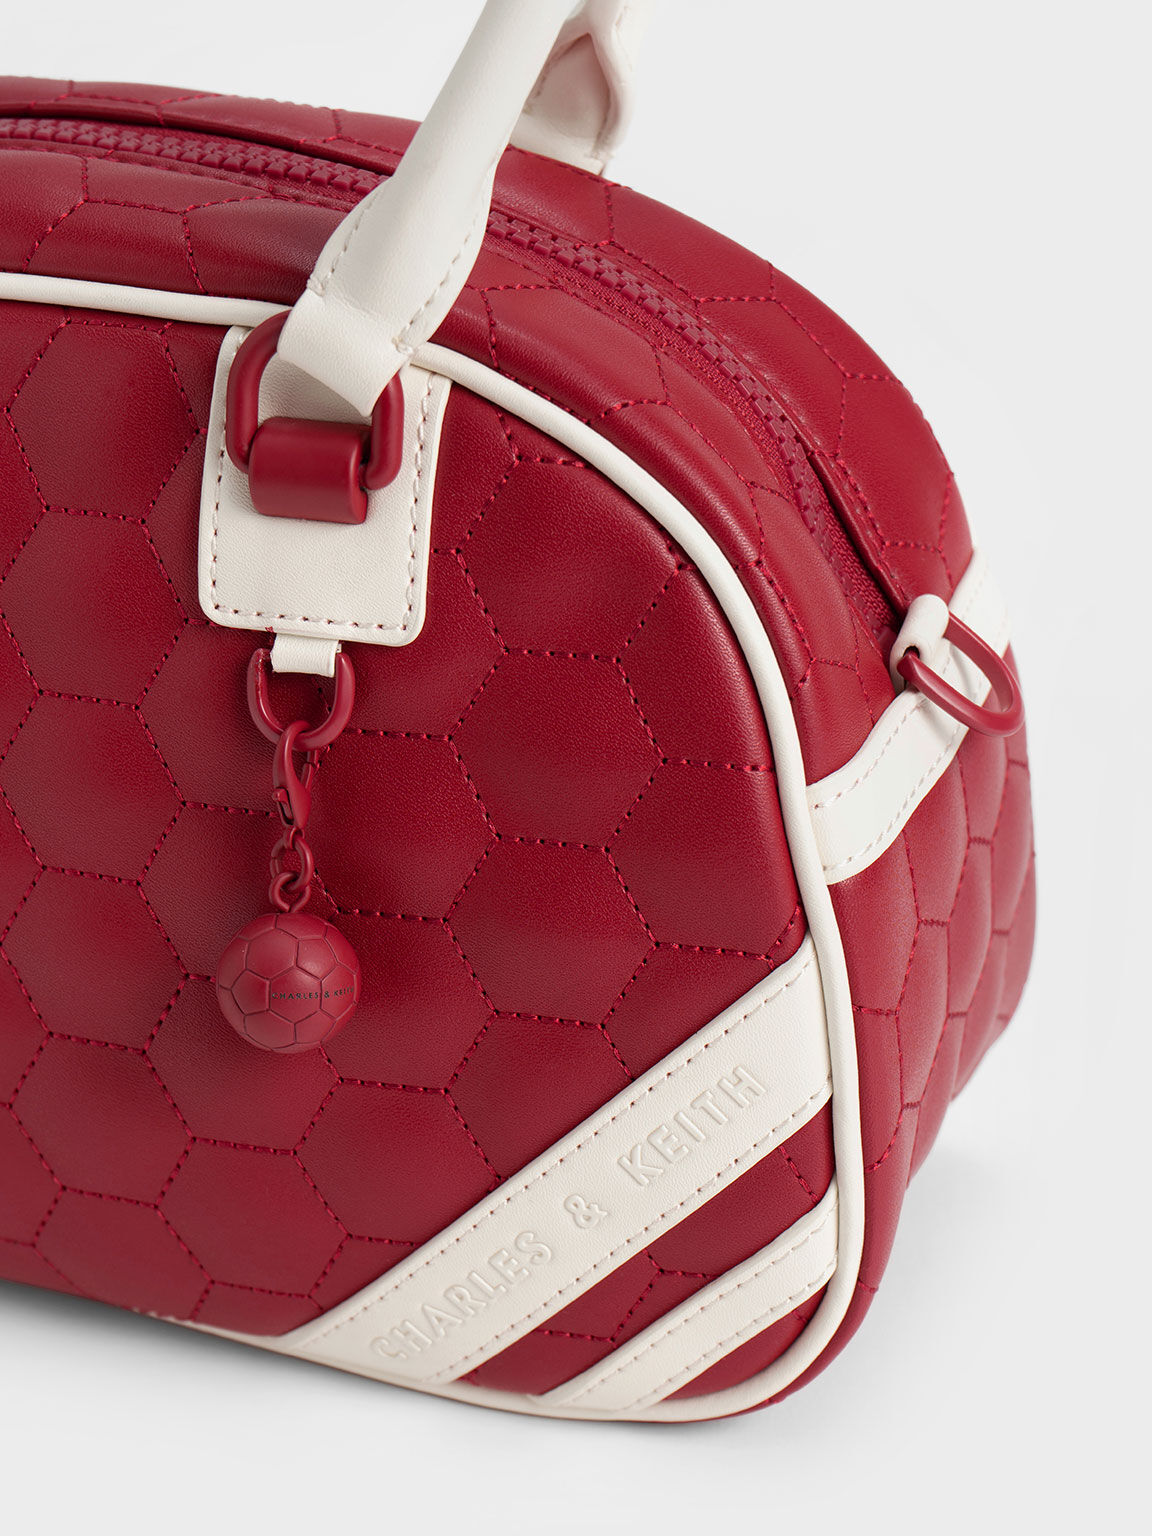 Striped Textured Bowling Bag, Red, hi-res